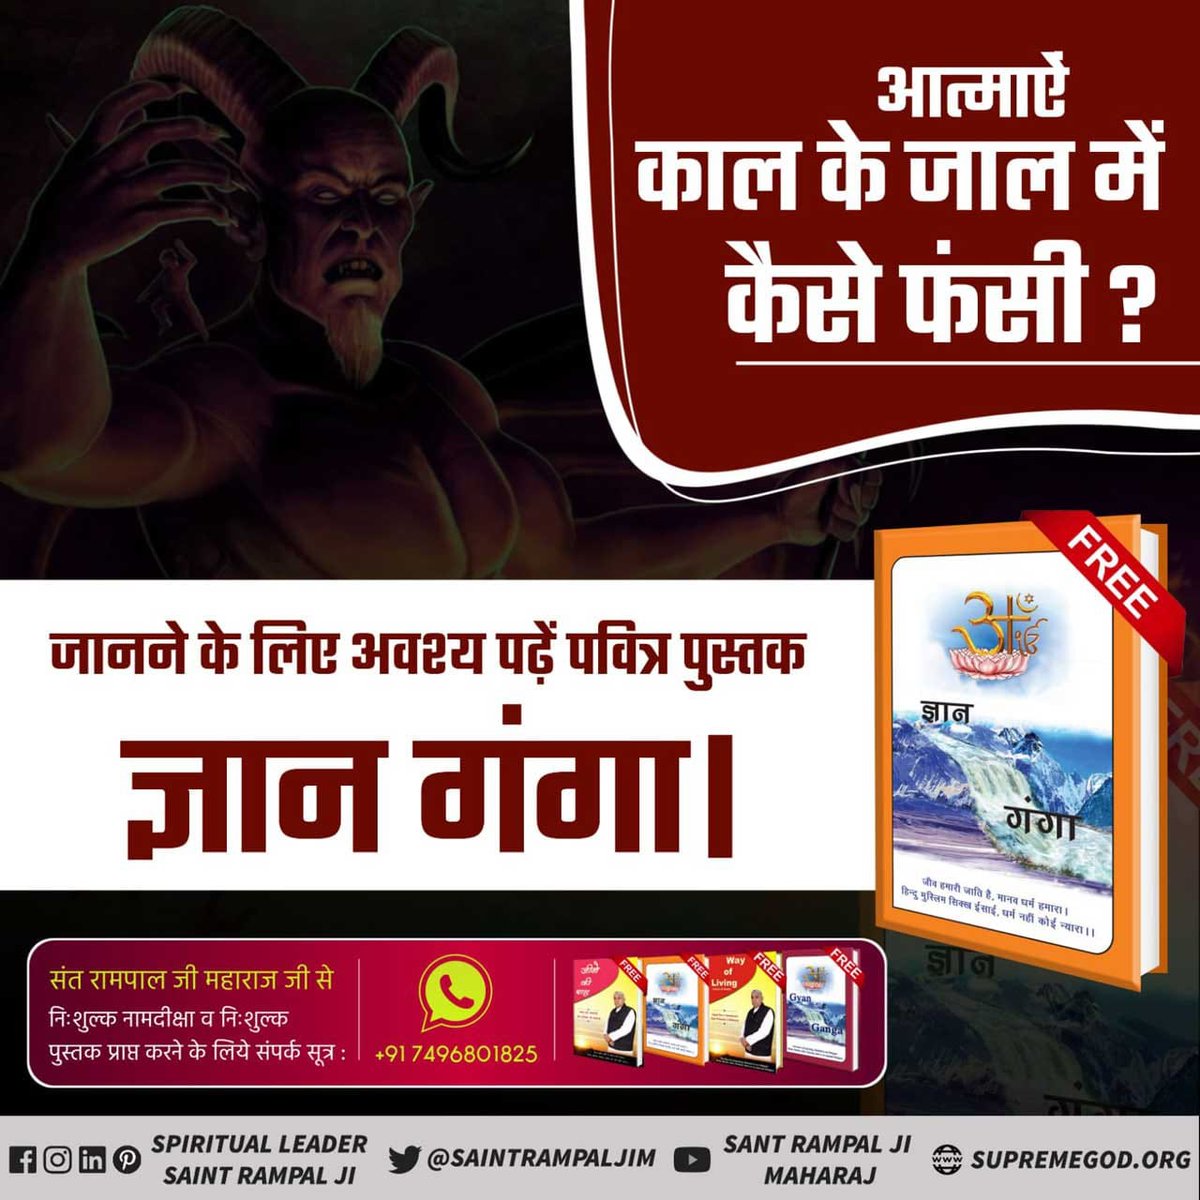 #GodMorningWednesday
Do you know how souls got trapped in Kaal Brahm's net? For this information, read the precious book Gyan Ganga and Watch Sant Rampal Ji's Satsang Sadhna Channel from 7:30 PM onwards.
#wednesdaythought